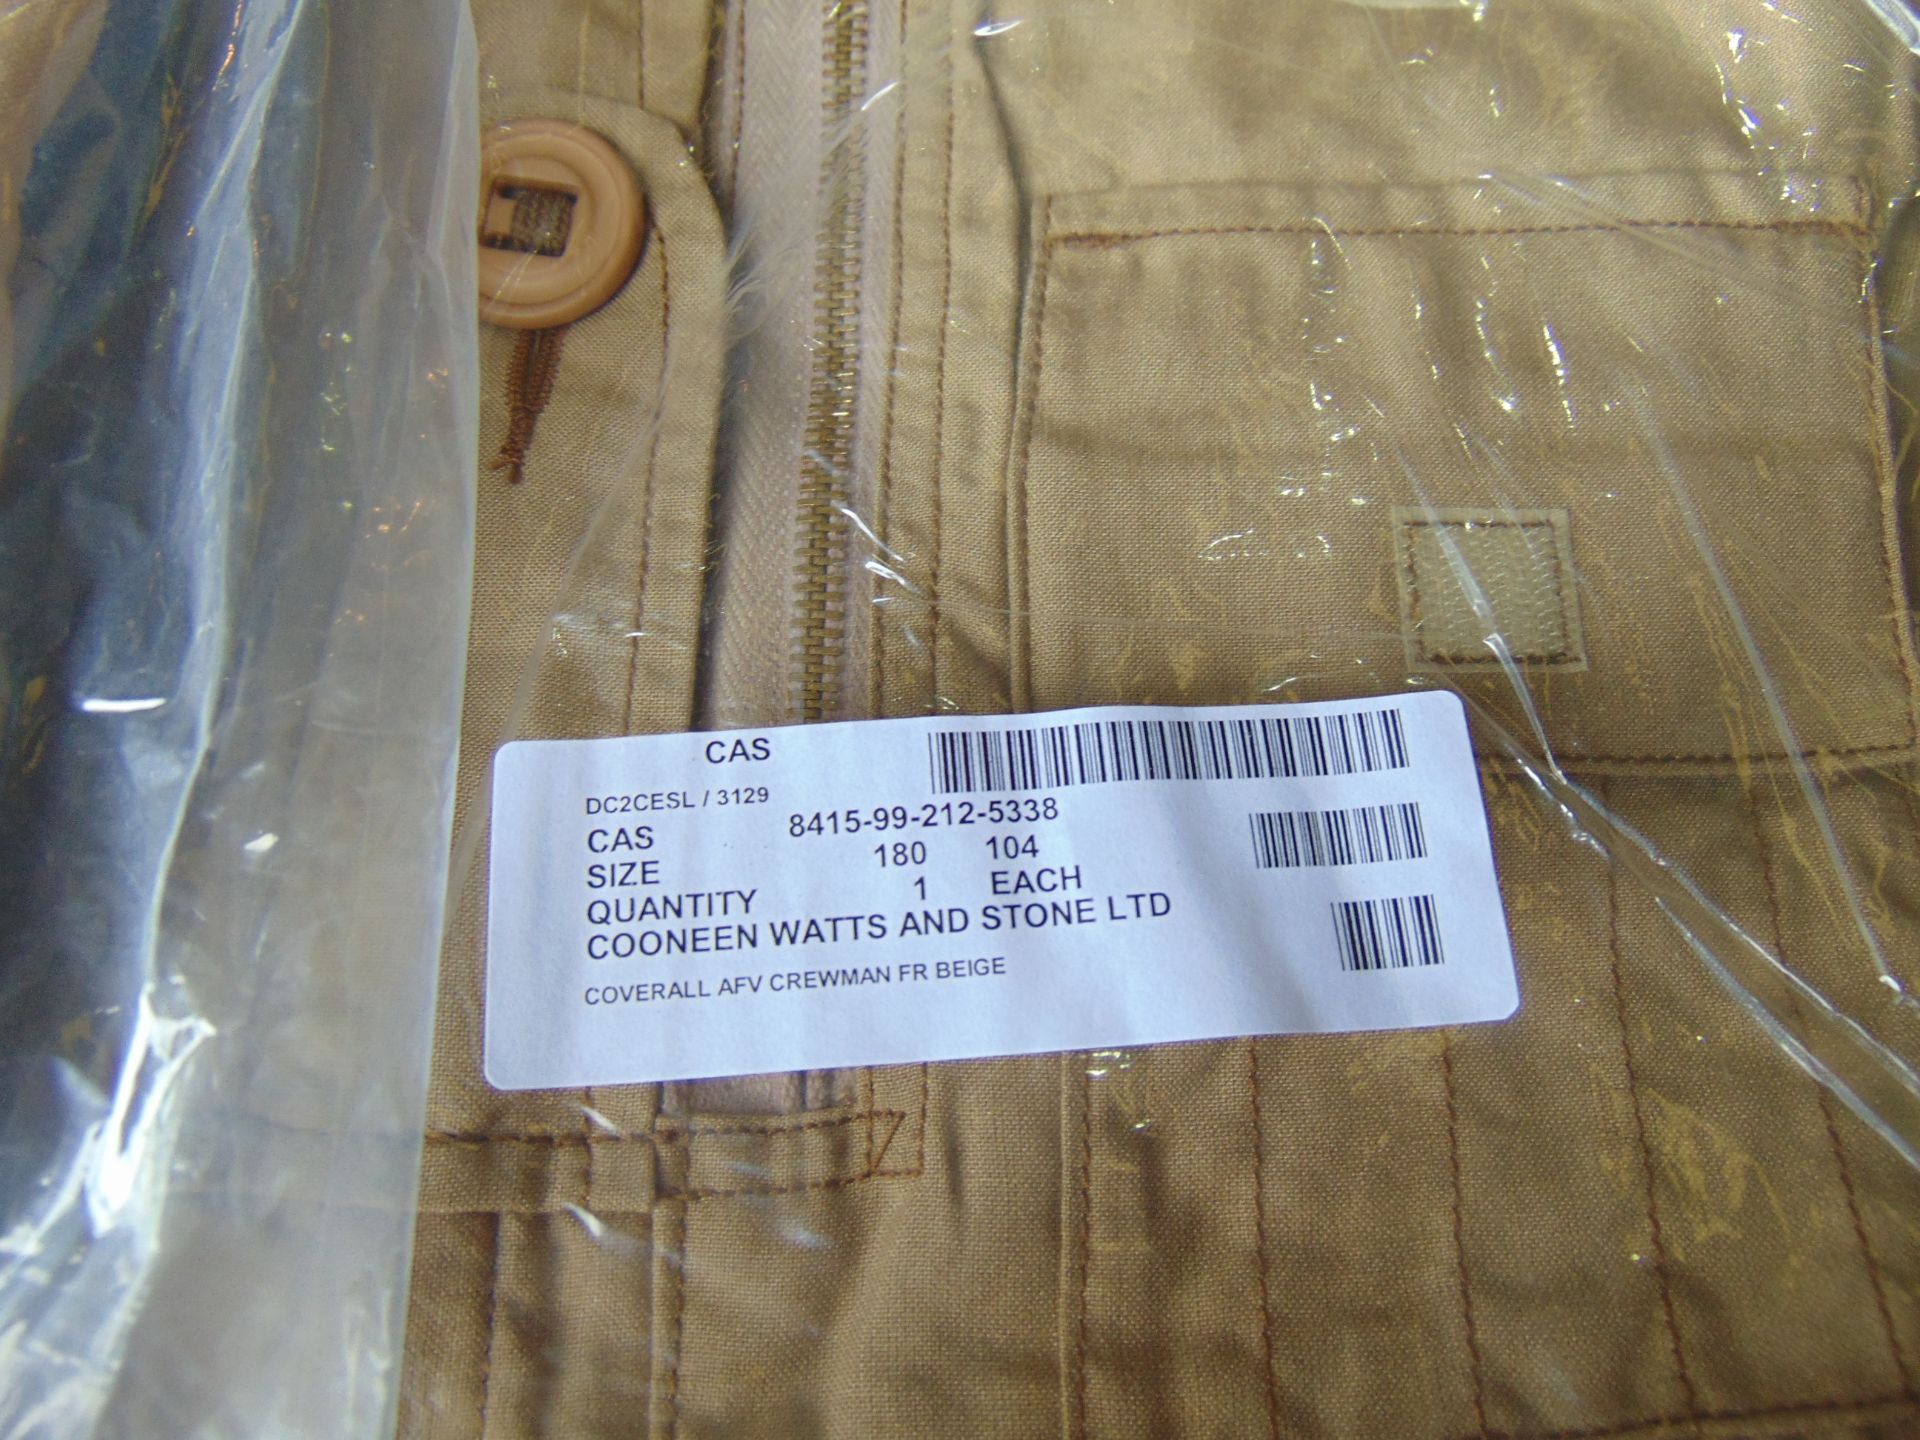 2 x New Unissued AFV Crew mans Coverall in Original Packing - Image 3 of 7